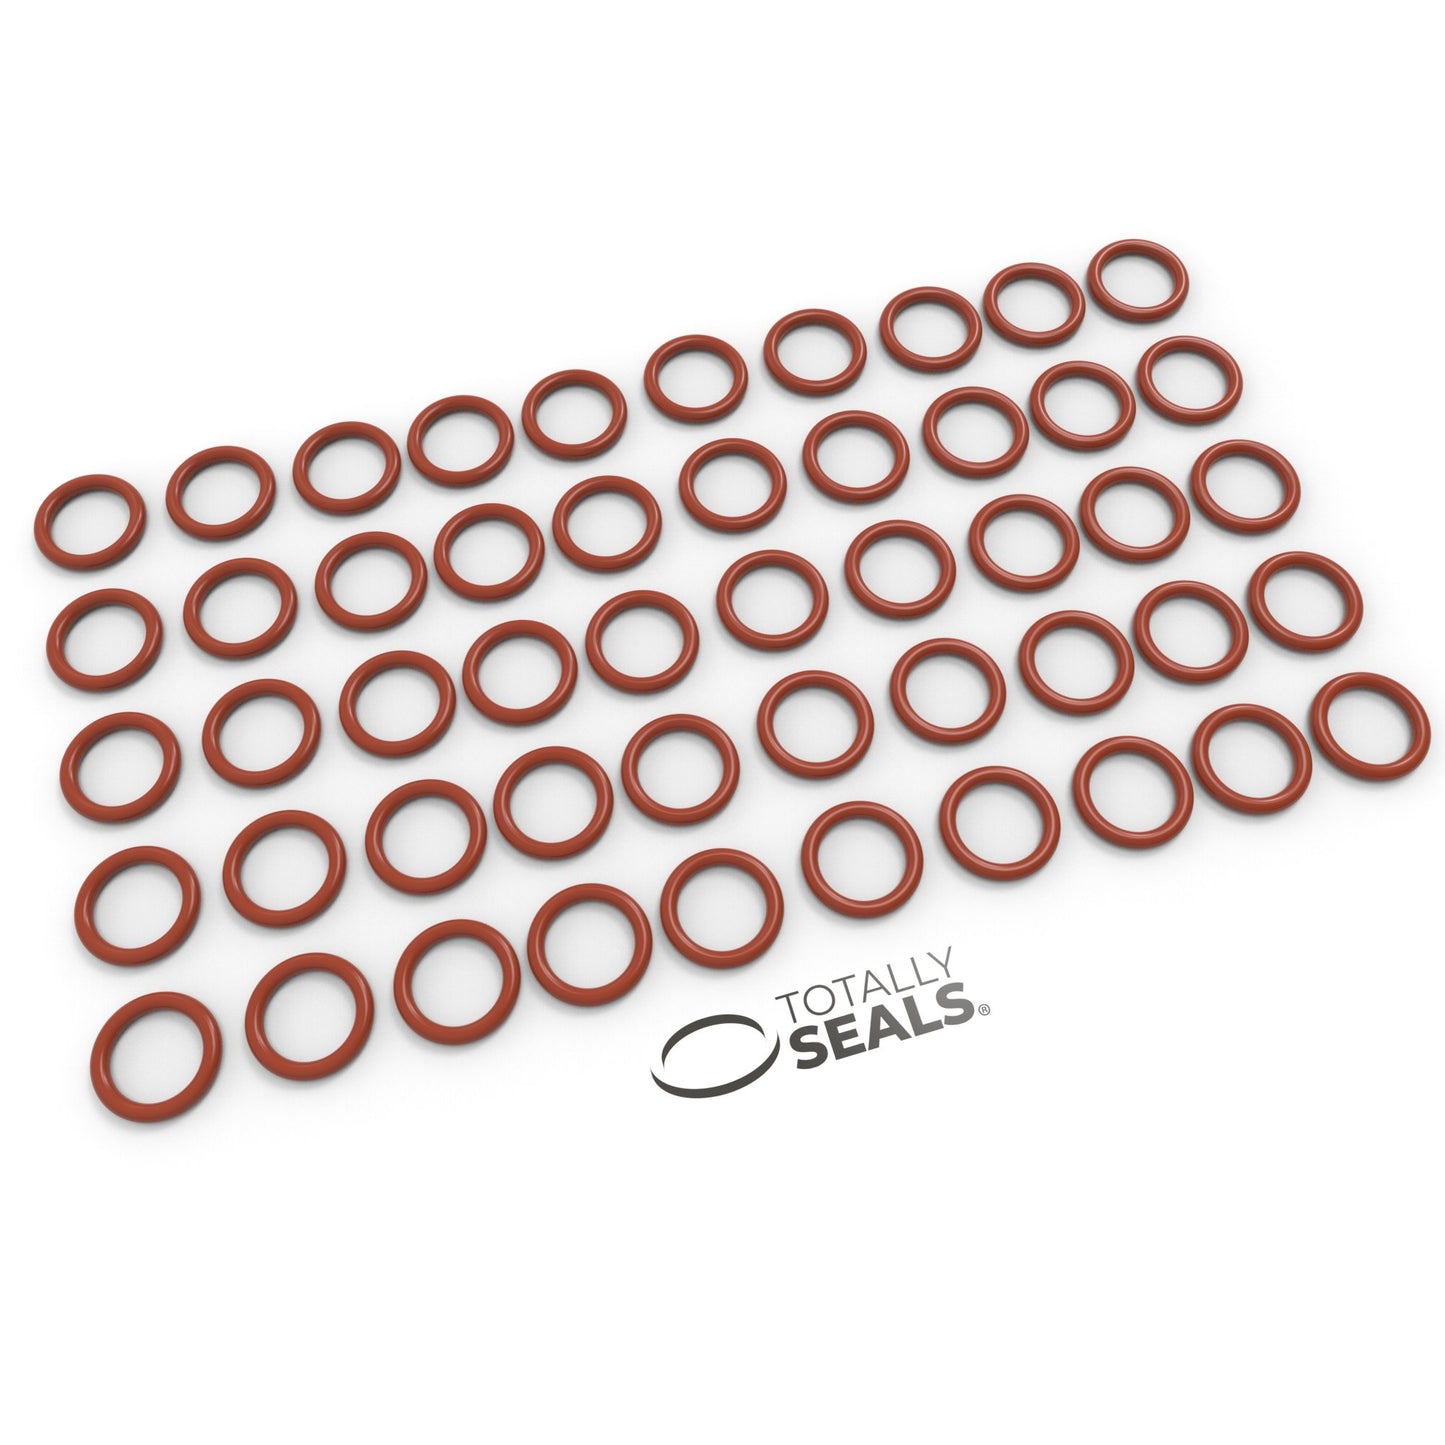 10mm x 2mm (14mm OD) Silicone O-Rings - Totally Seals®